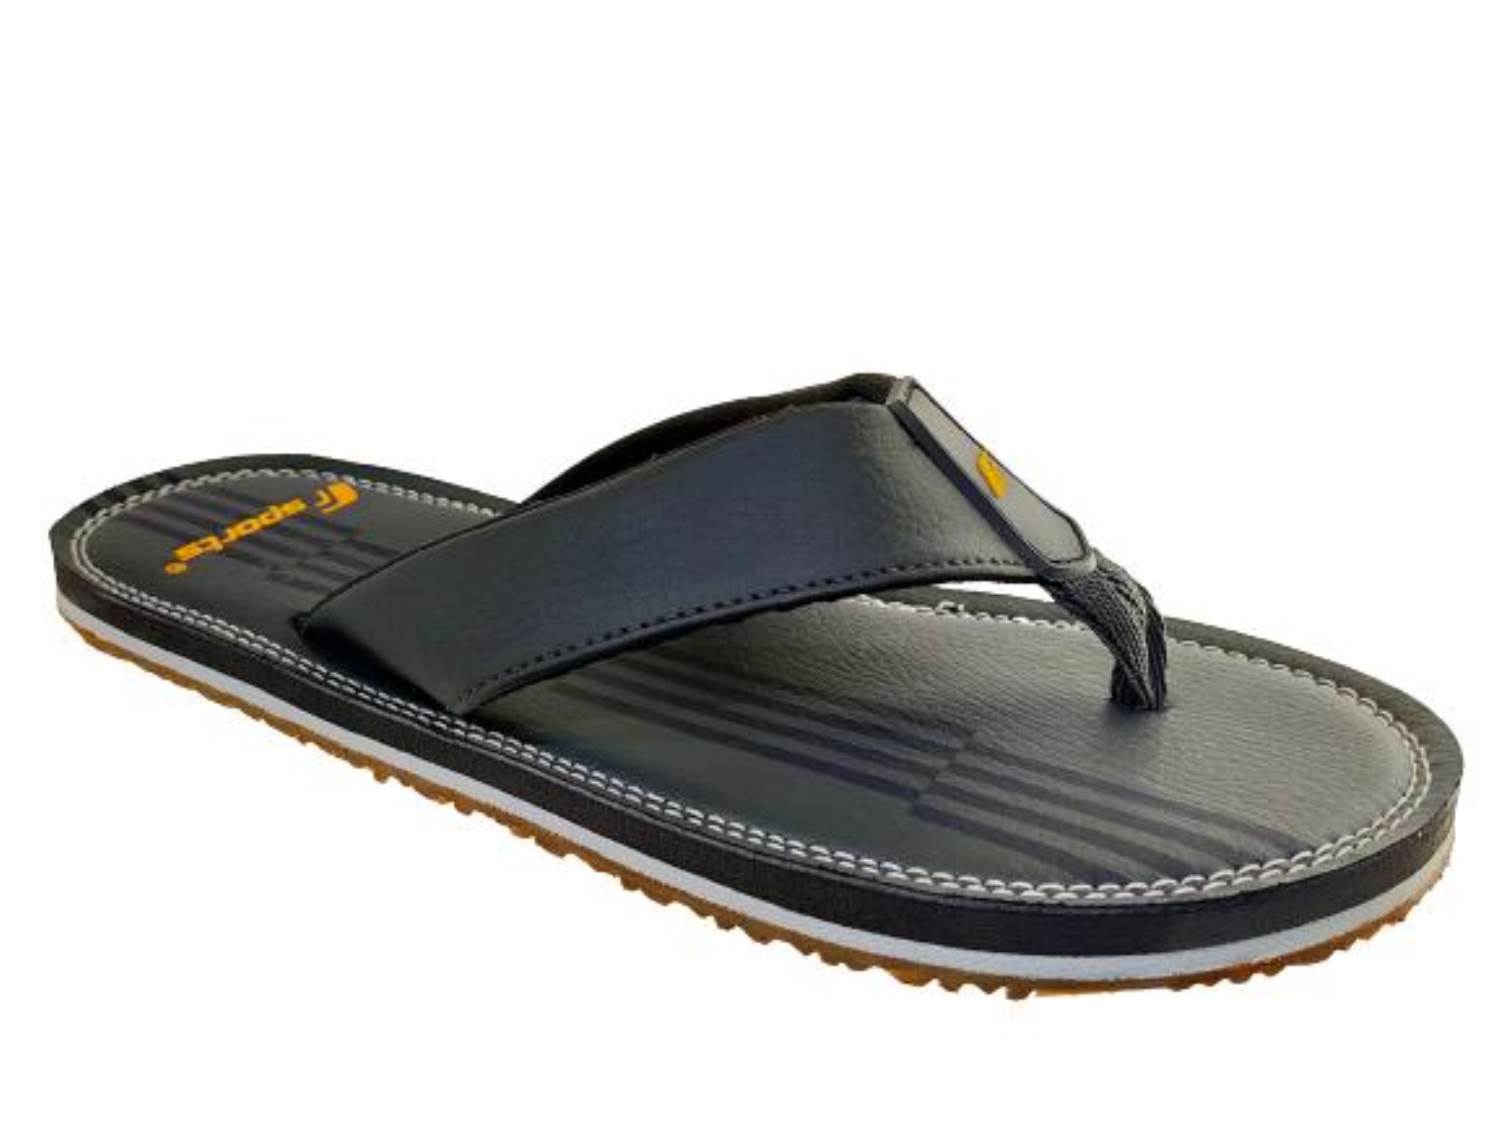 Men's sandals | 4F: Sportswear and shoes